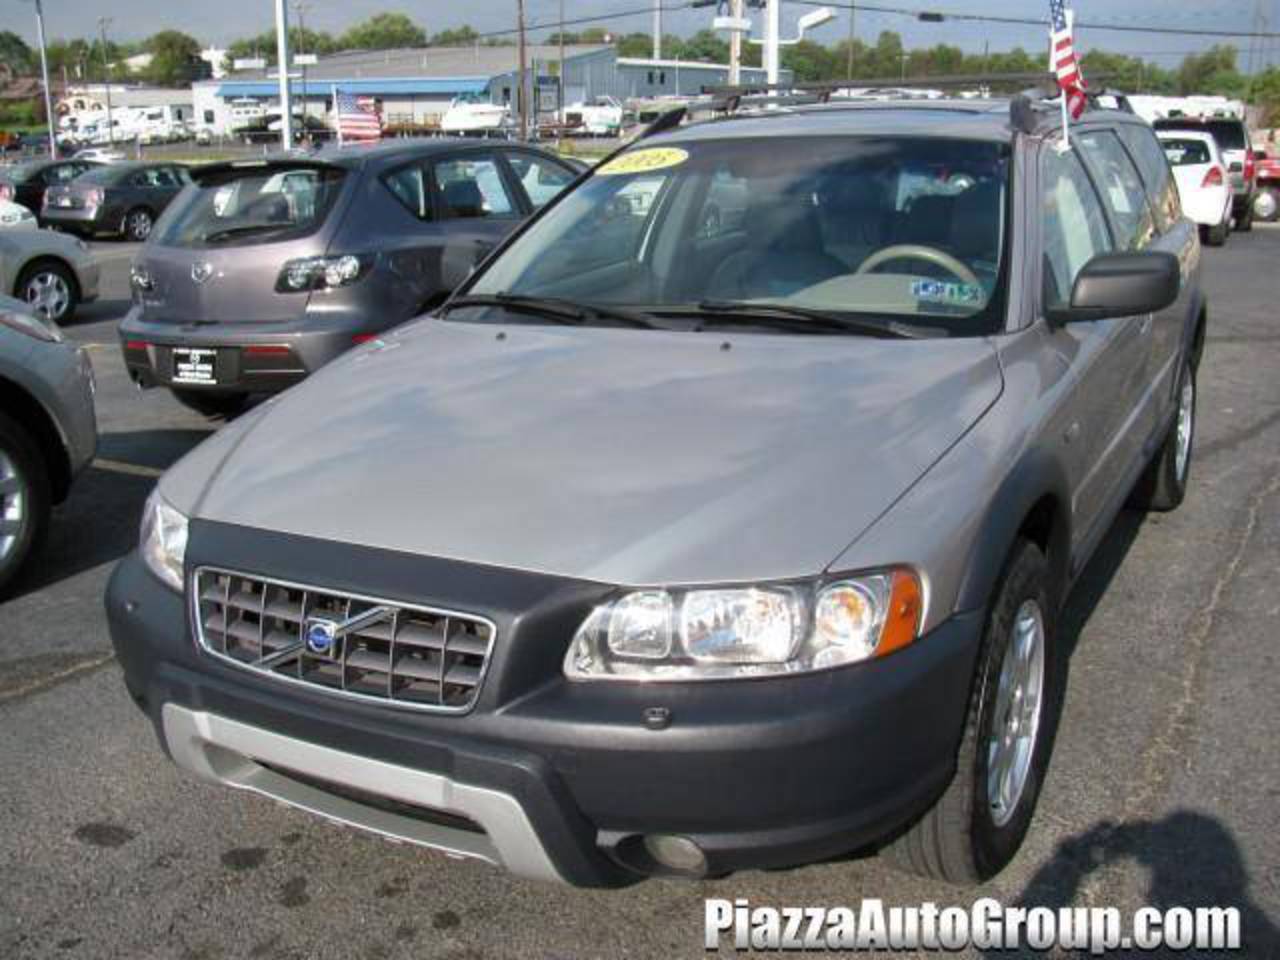 Volvo XC70 Cross Country AWD. View Download Wallpaper. 640x480. Comments